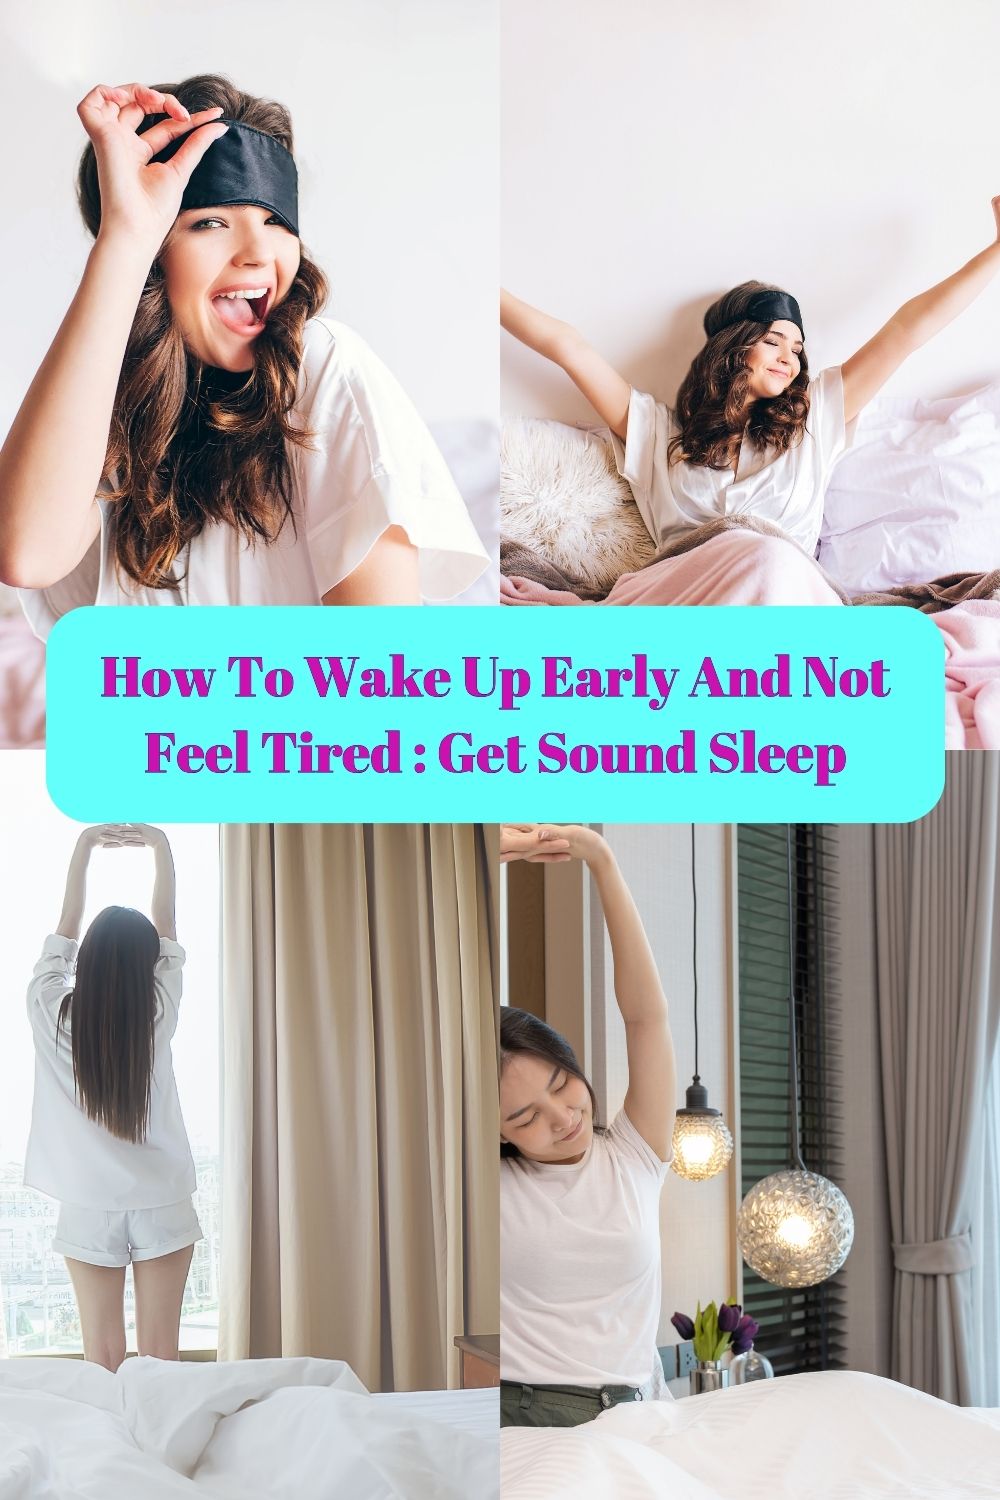 How To Wake Up Early And Not Feel Tired